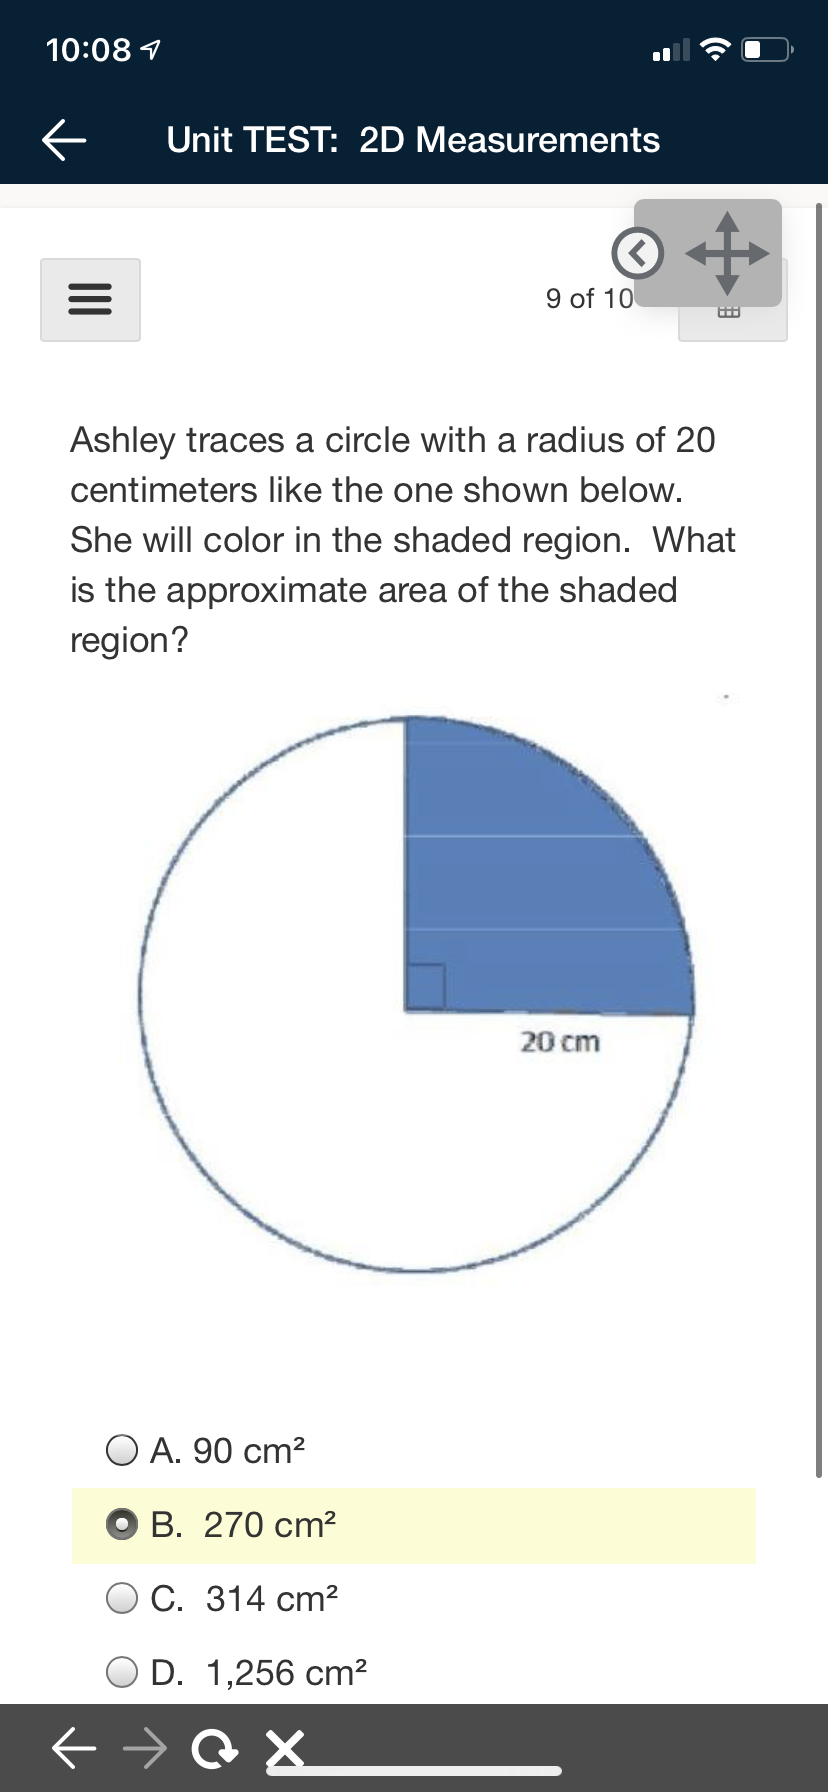 10:08 7
Unit TEST: 2D Measurements
9 of 10
Ashley traces a circle with a radius of 20
centimeters like the one shown below.
She will color in the shaded region. What
is the approximate area of the shaded
region?
20 cm
O A. 90 cm?
В. 270 cm?
С. 314 ст?
D. 1,256 cm?
